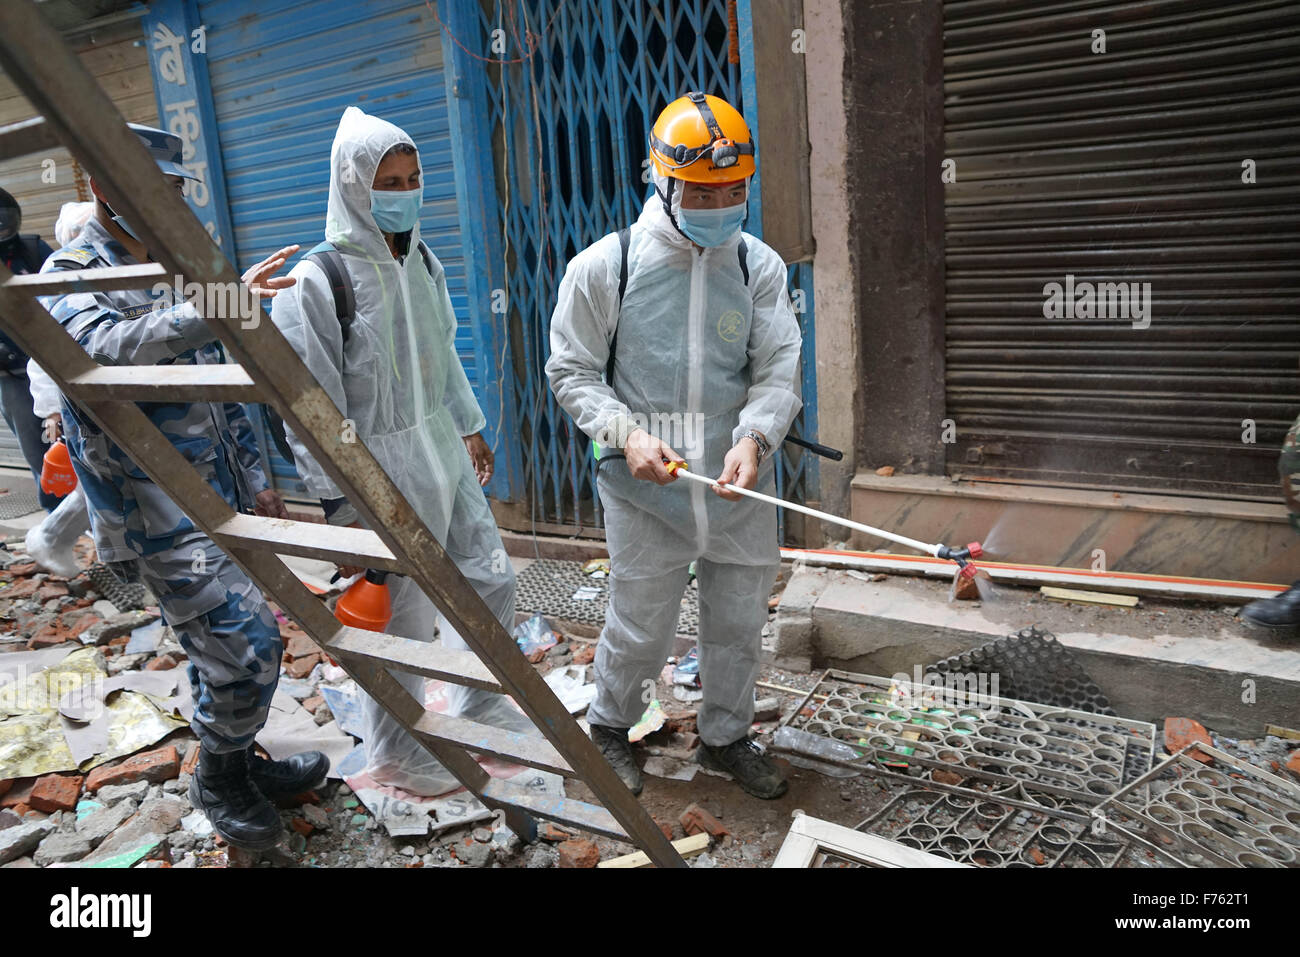 Rescue personnel spray disinfectant, earthquake, nepal, asia Stock Photo